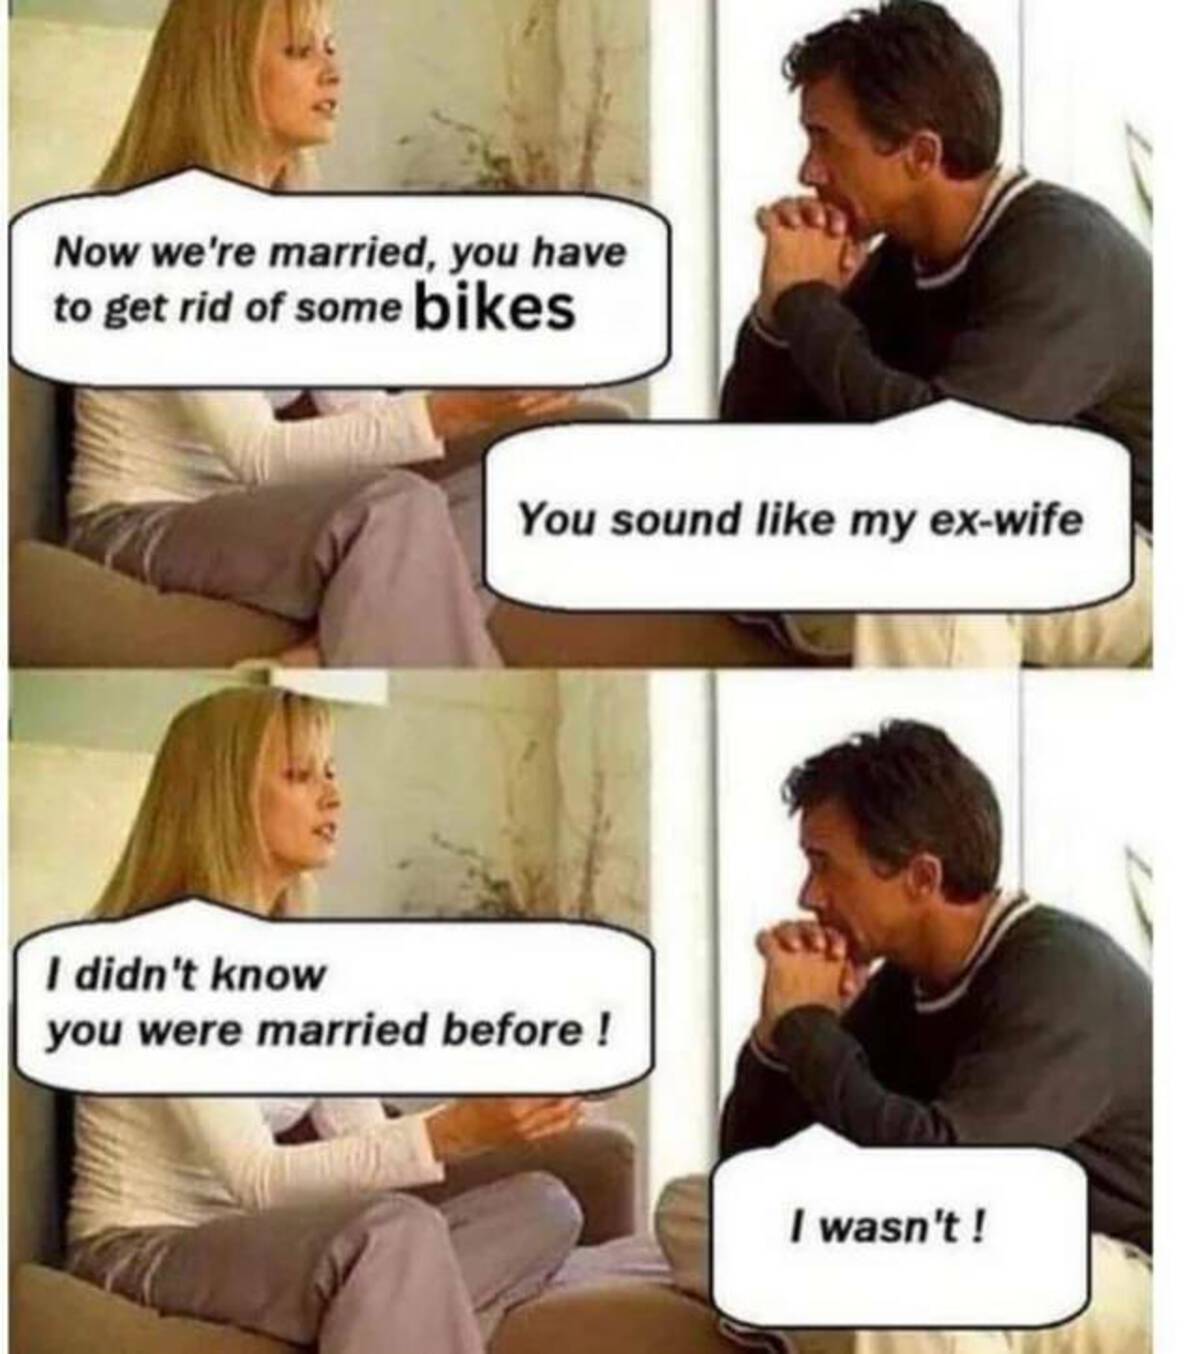 programming and gf memes - Now we're married, you have to get rid of some bikes You sound my exwife I didn't know you were married before ! I wasn't!